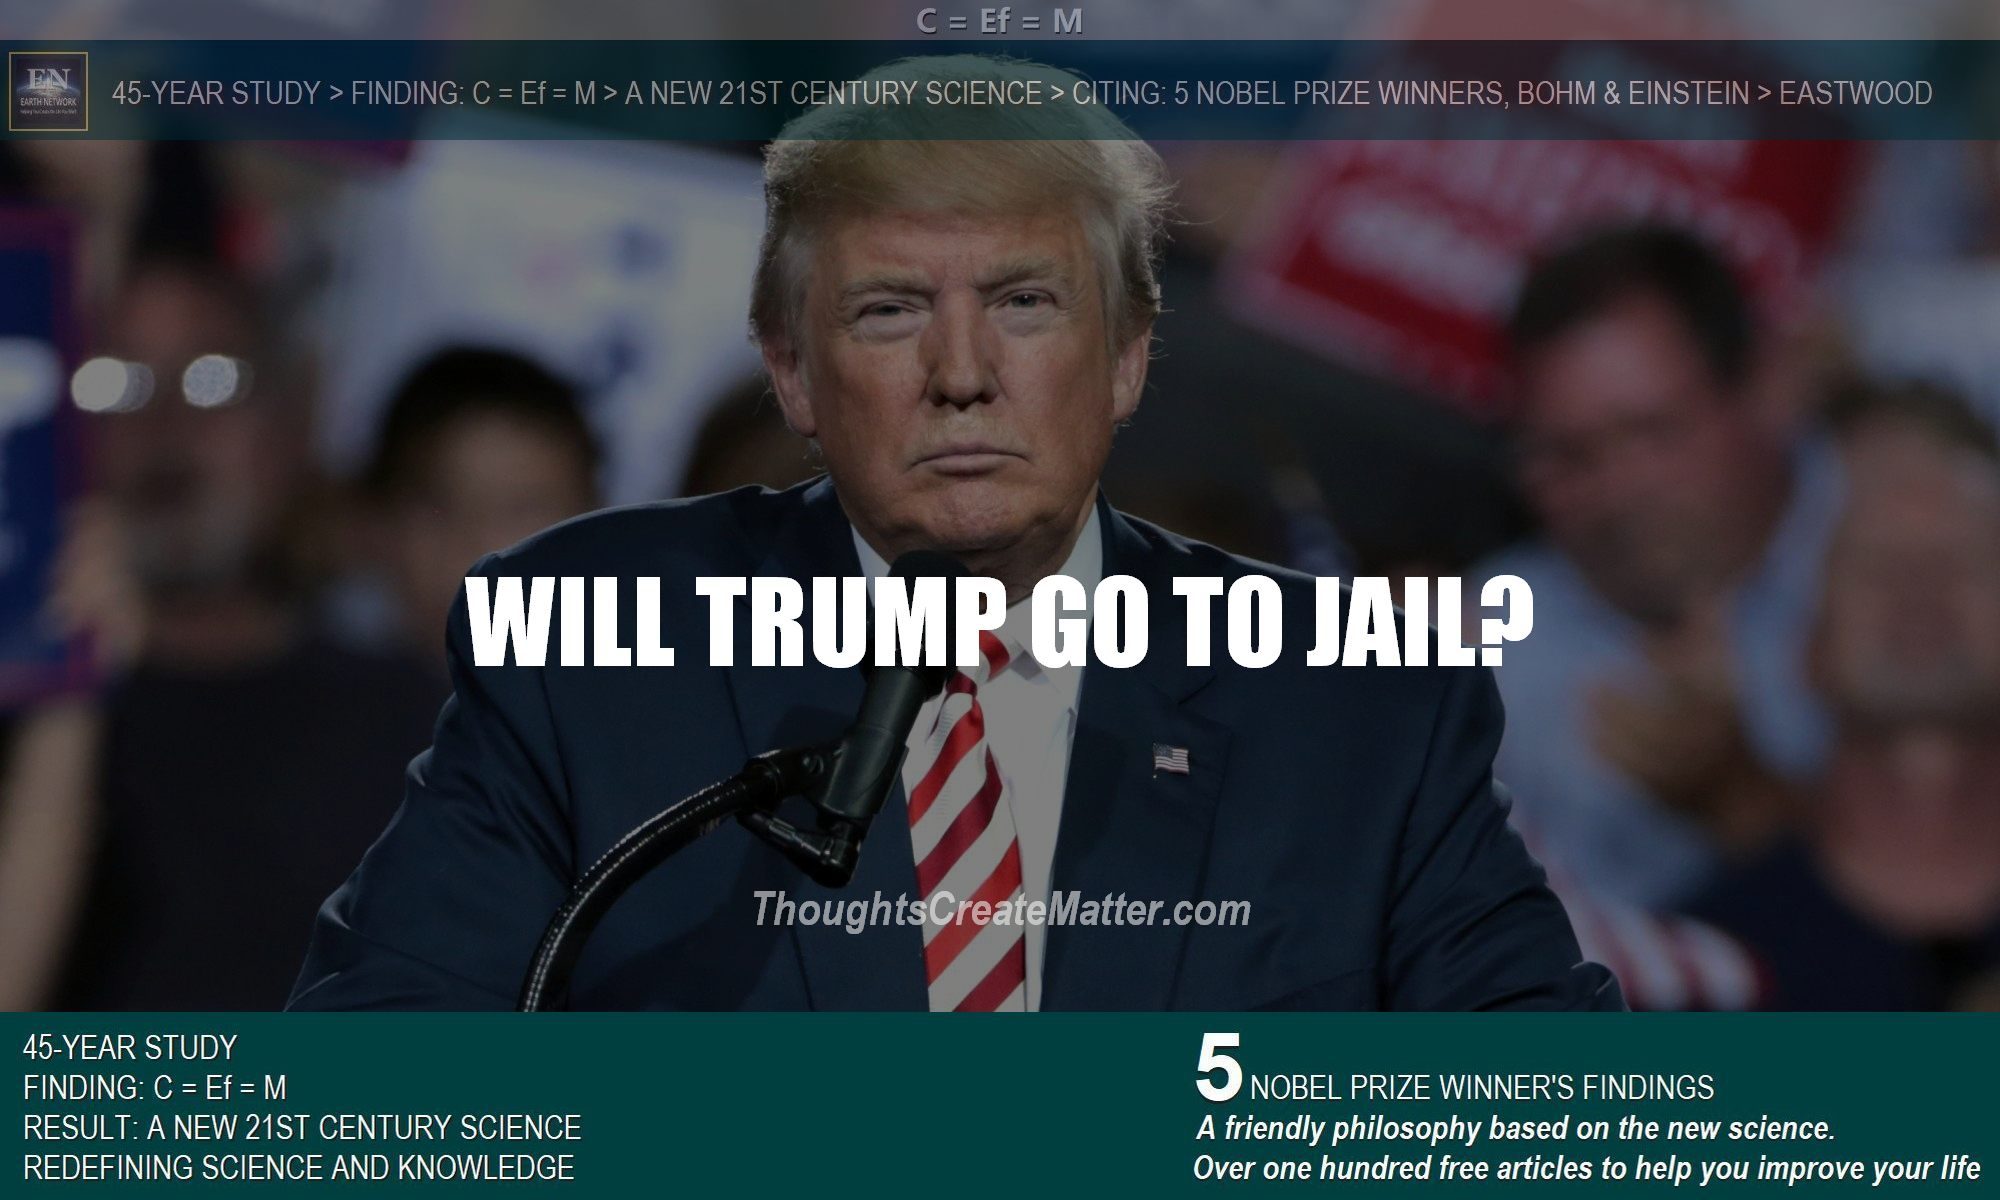 Trump frowning begs the question will trump go to jail? What is the underlying cause of problems and extremism? Will indictment and charges lead to possible prison time?